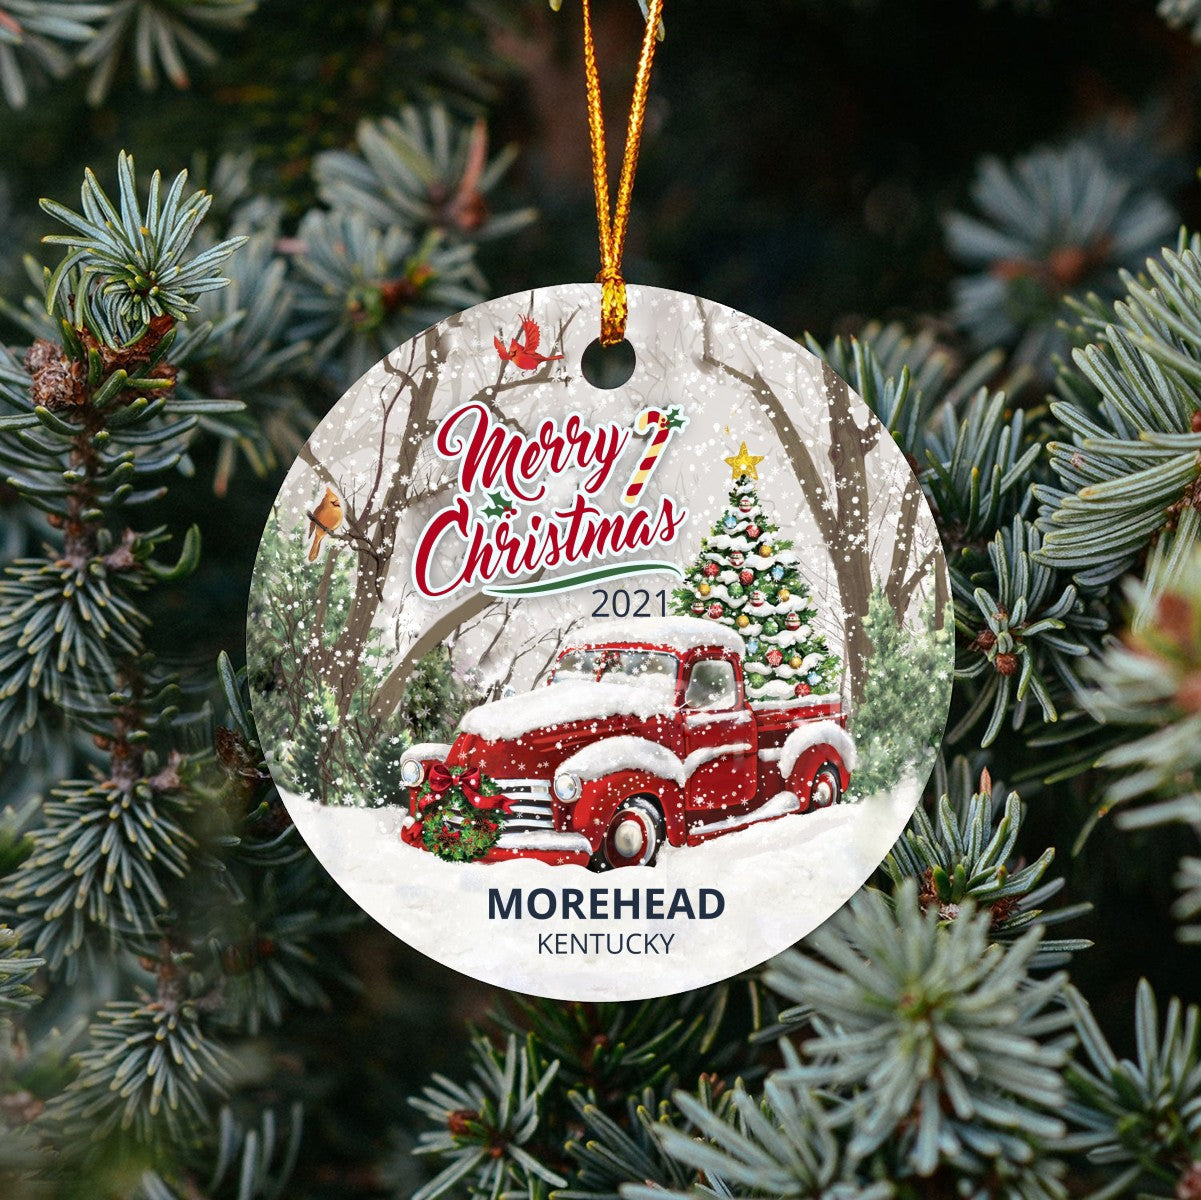 Christmas Tree Ornaments Morehead - Ornament Customize With Name City And State Morehead Kentucky KY - Red Truck Xmas Ornaments 3'' Plastic Gift For Family, Friend And Housewarming